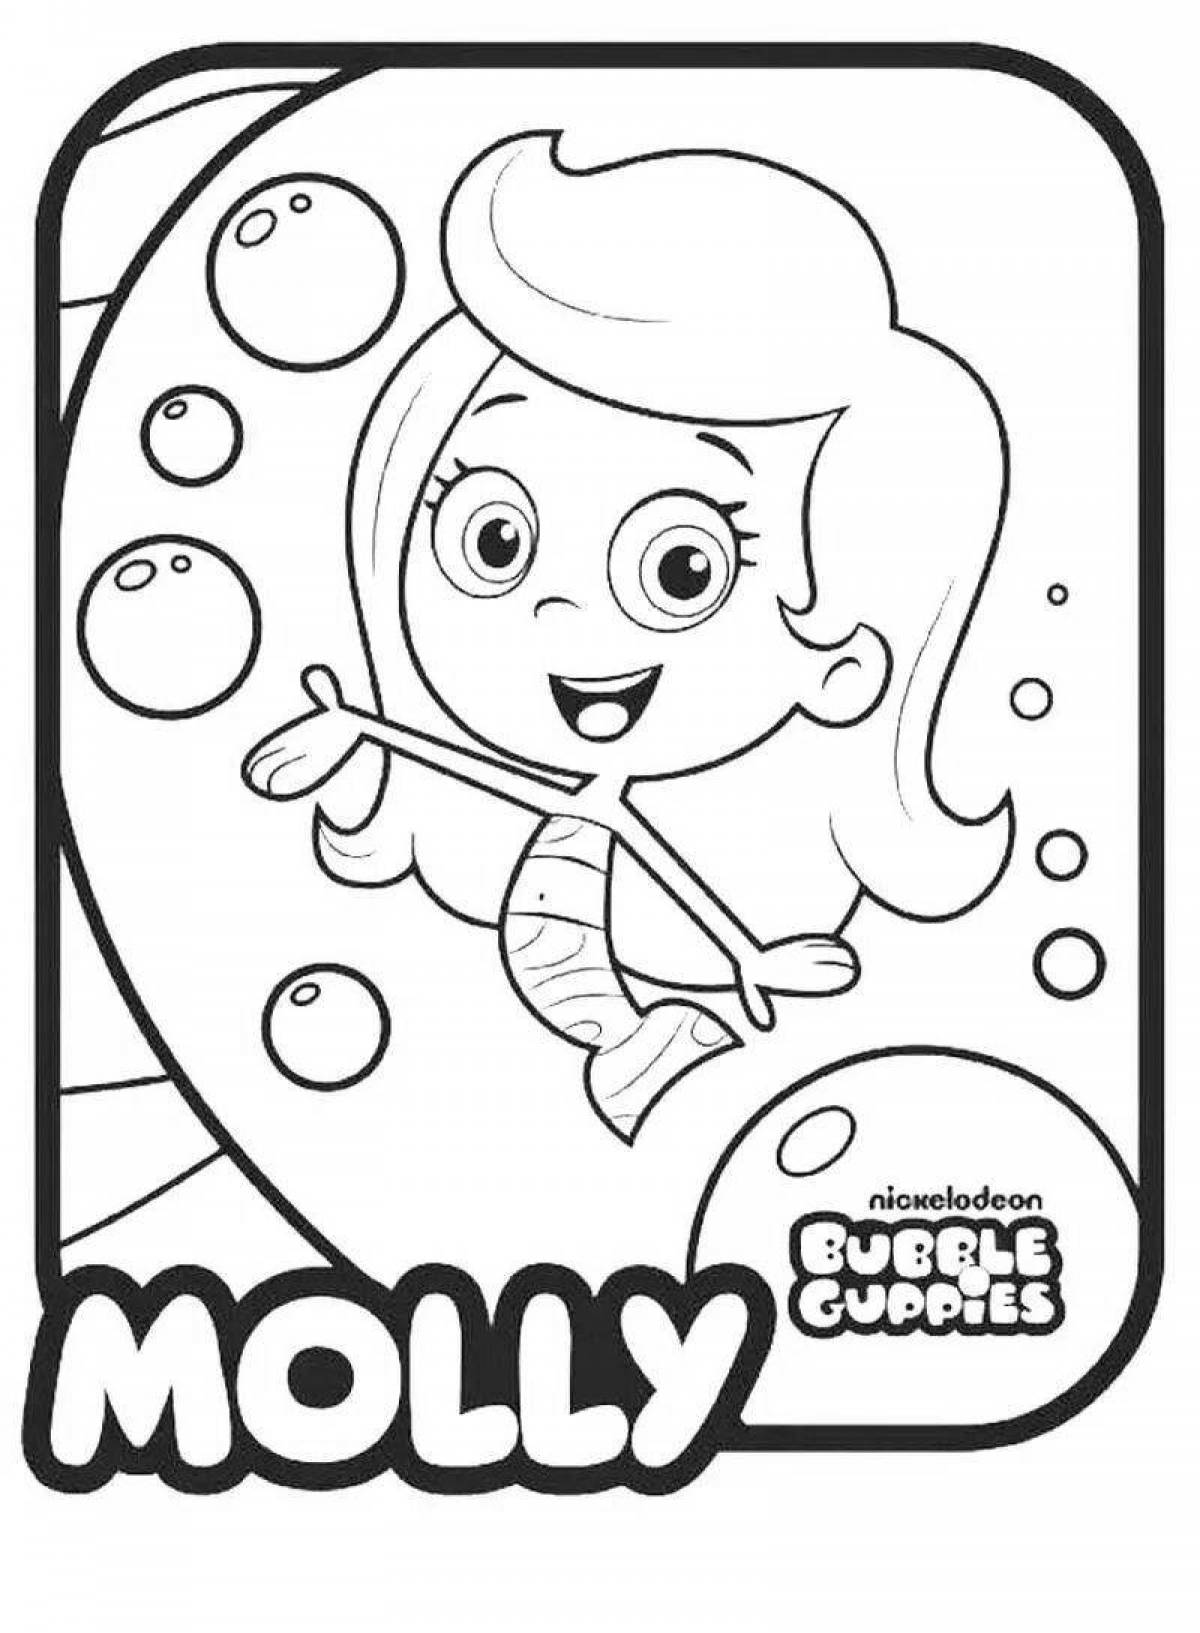 Aababy fun coloring page